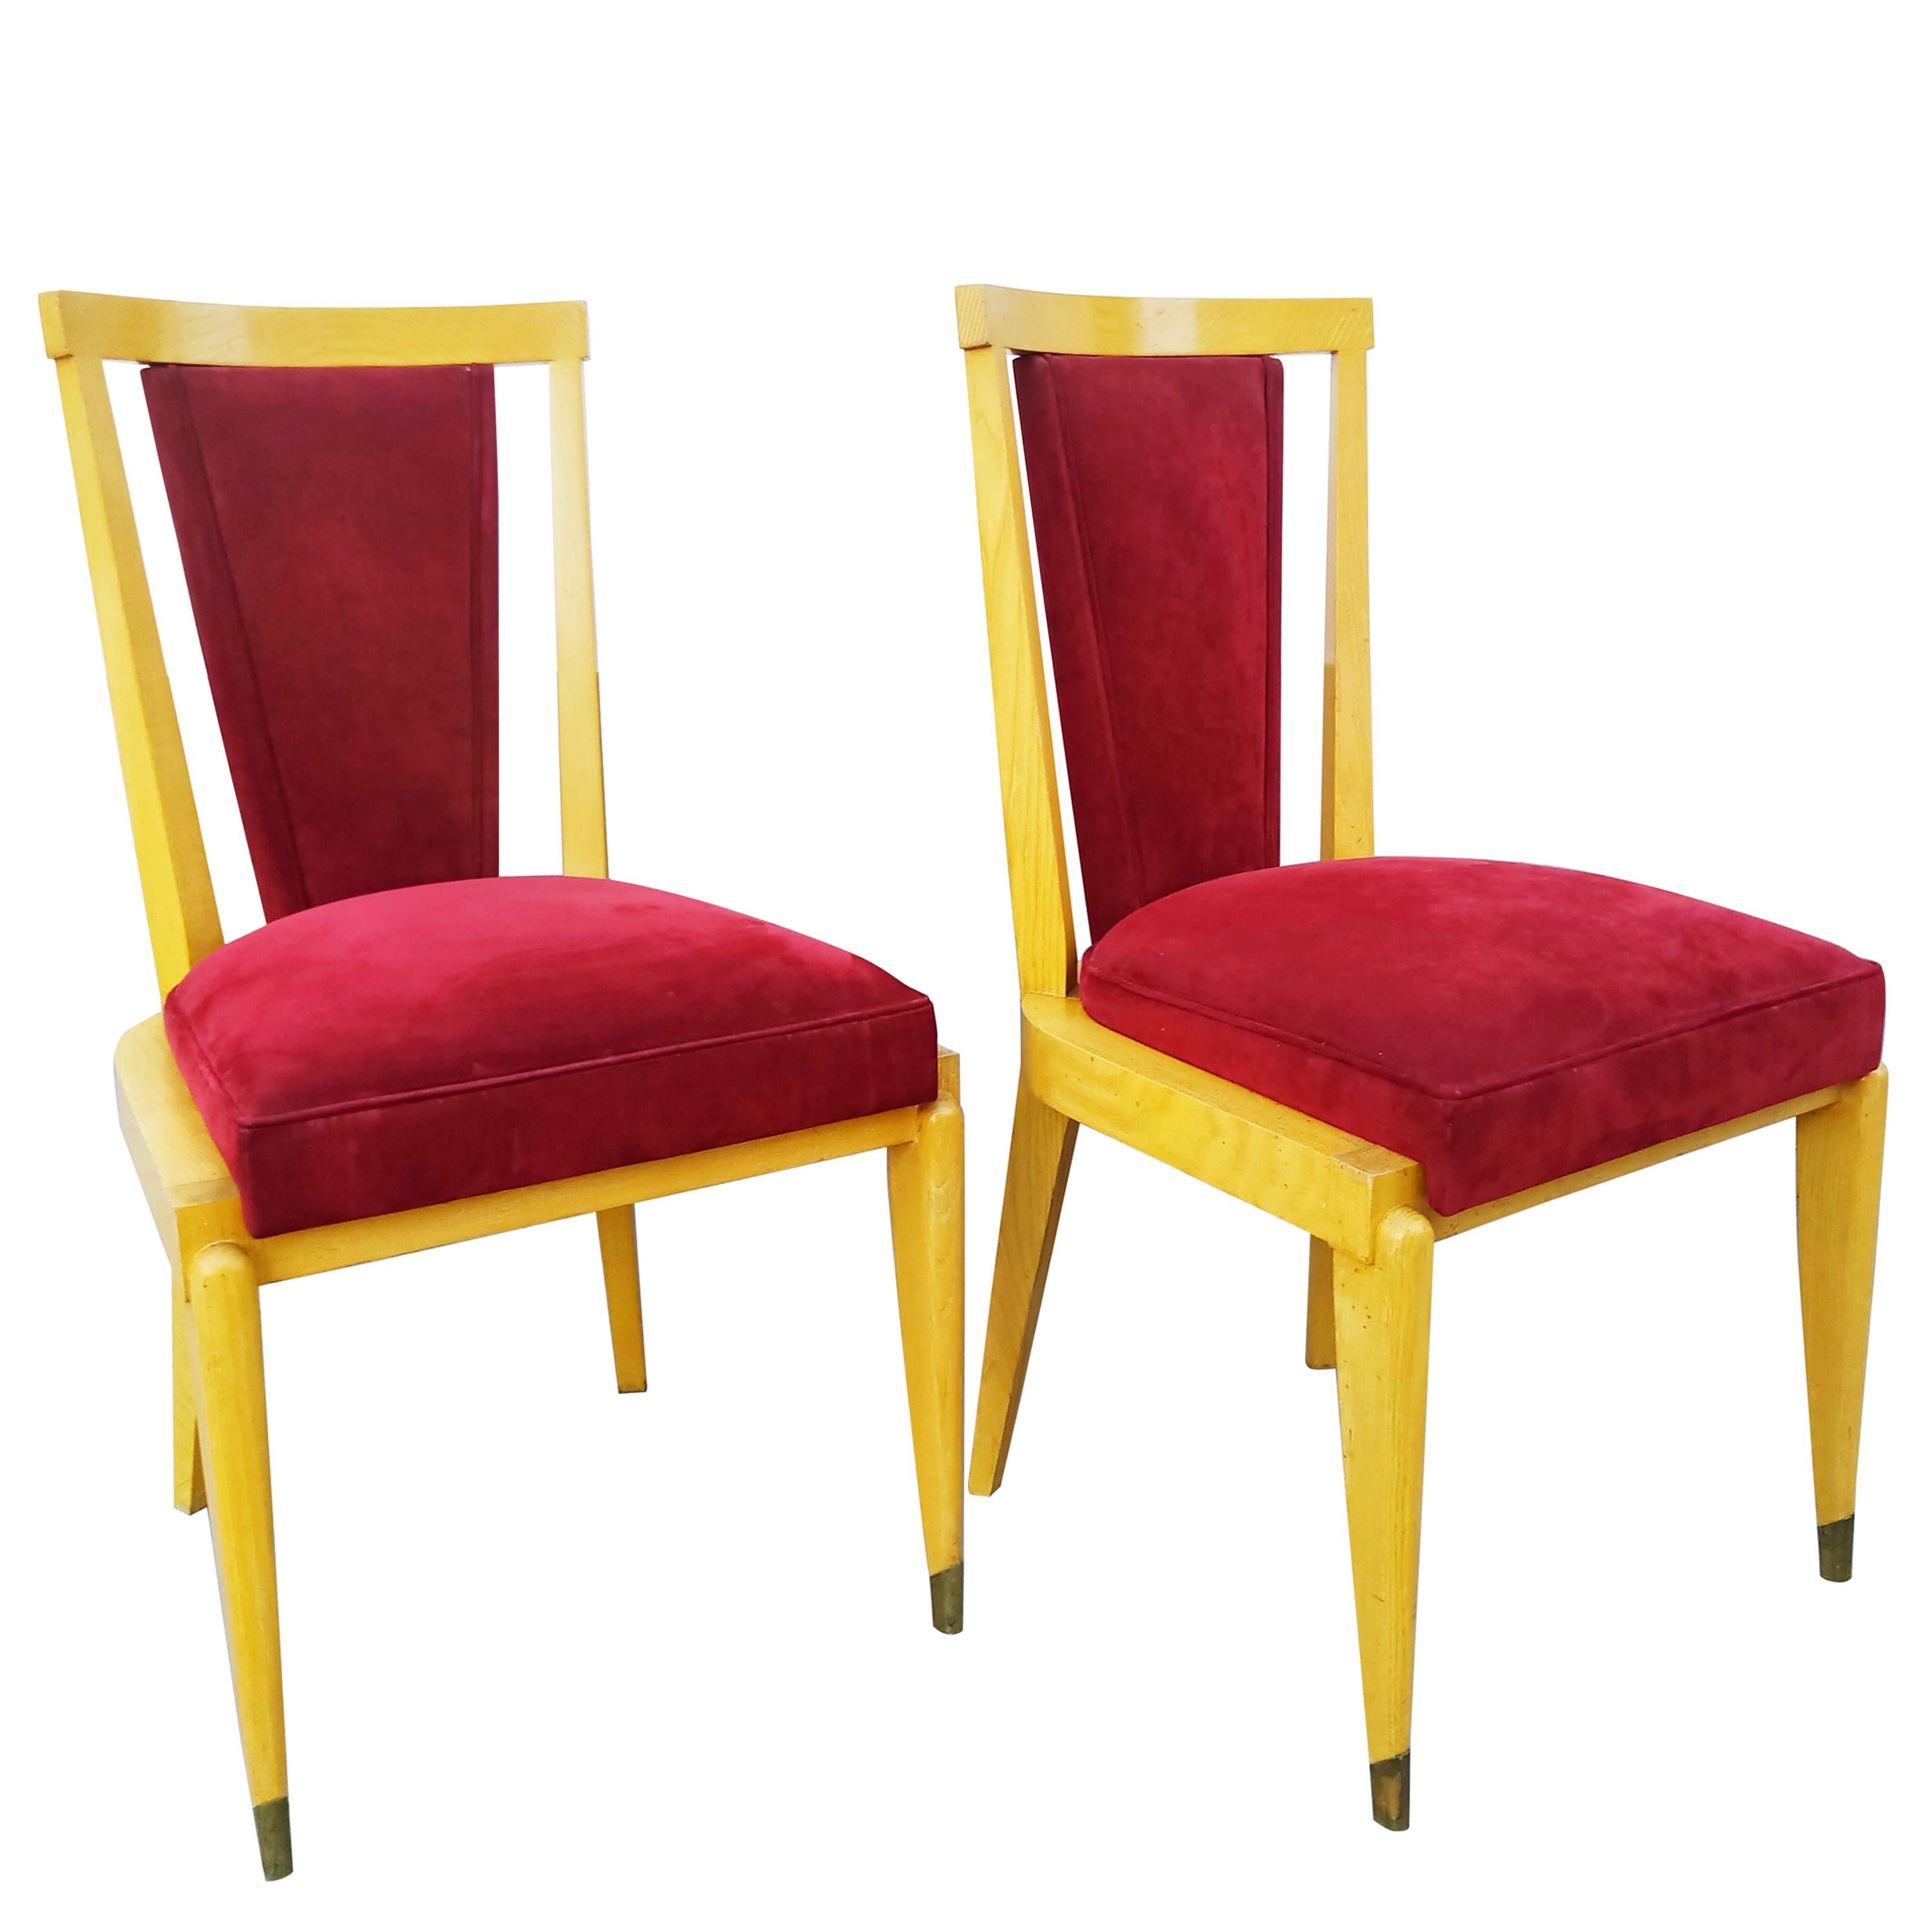 Rare Pair of André Arbus Chairs, France, 1940s